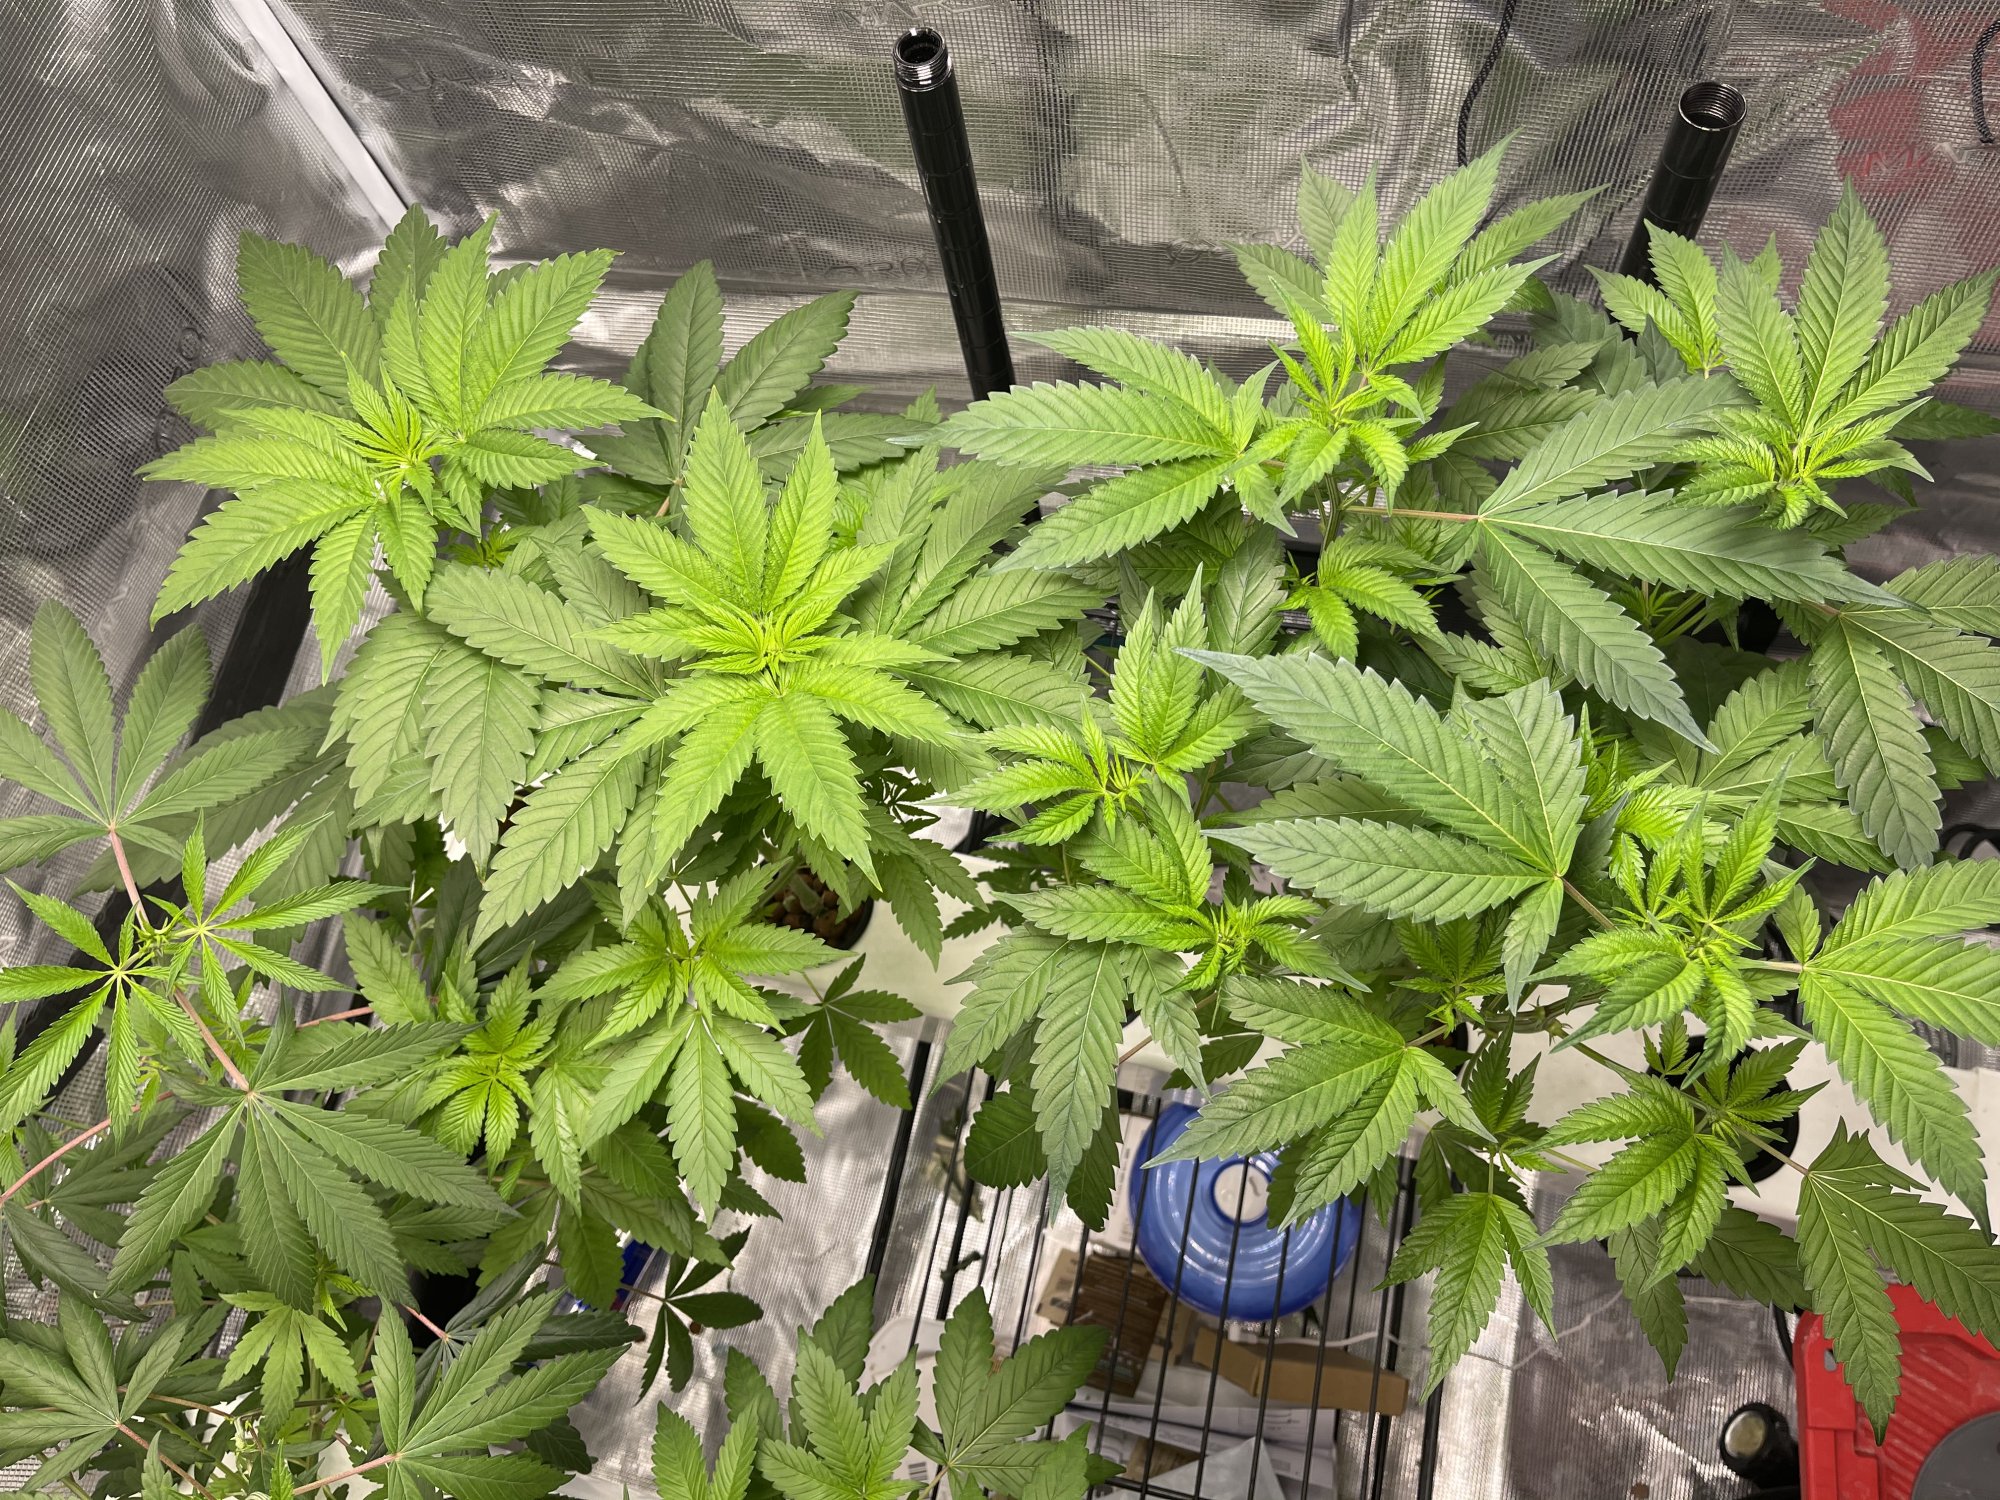 Working on my second grow 6